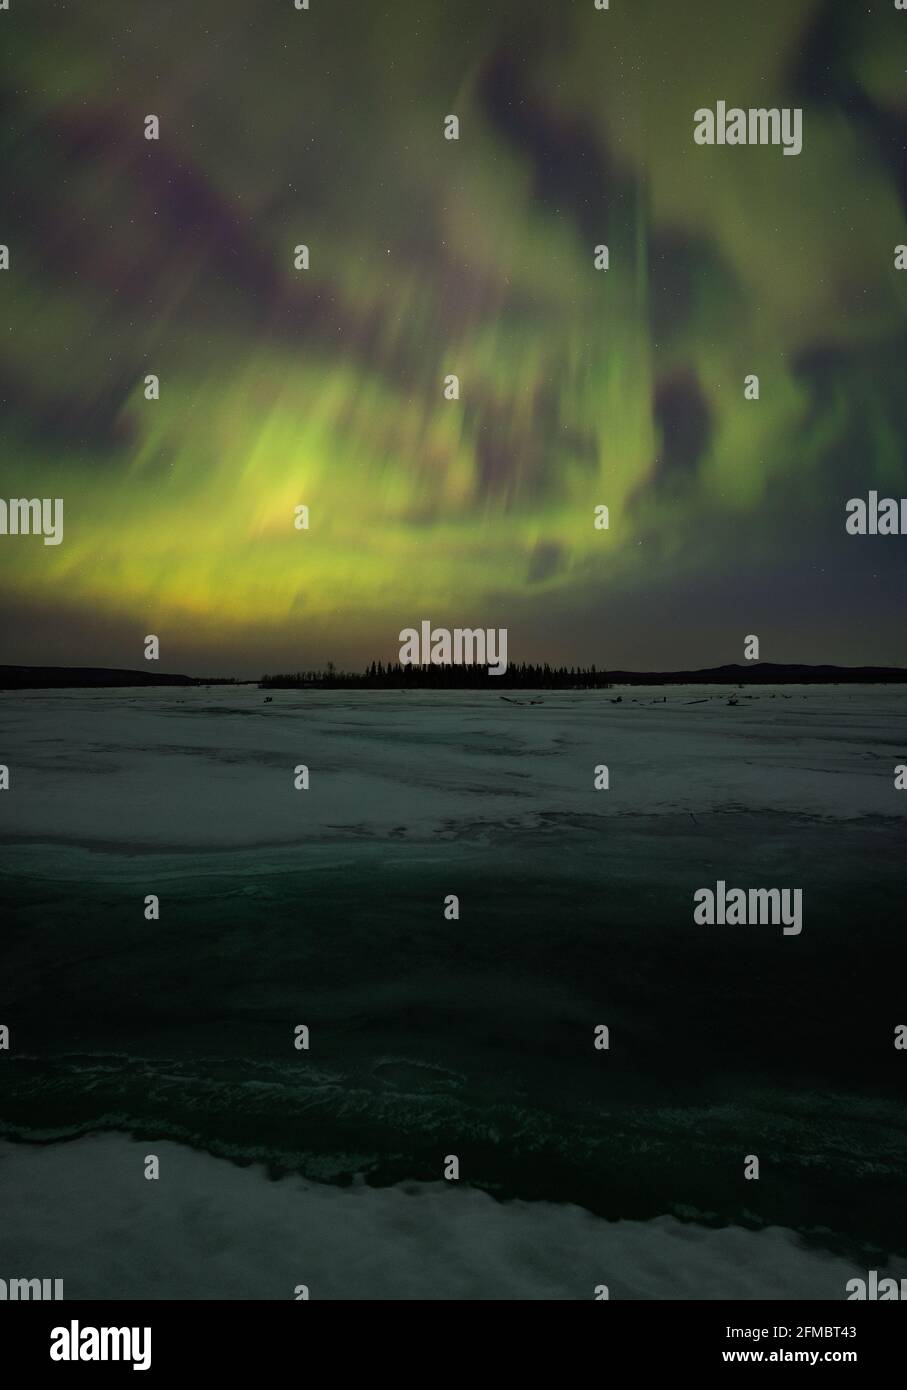 spring road-trip into the chaotic north! Northern lights dancing in full force! Stock Photo